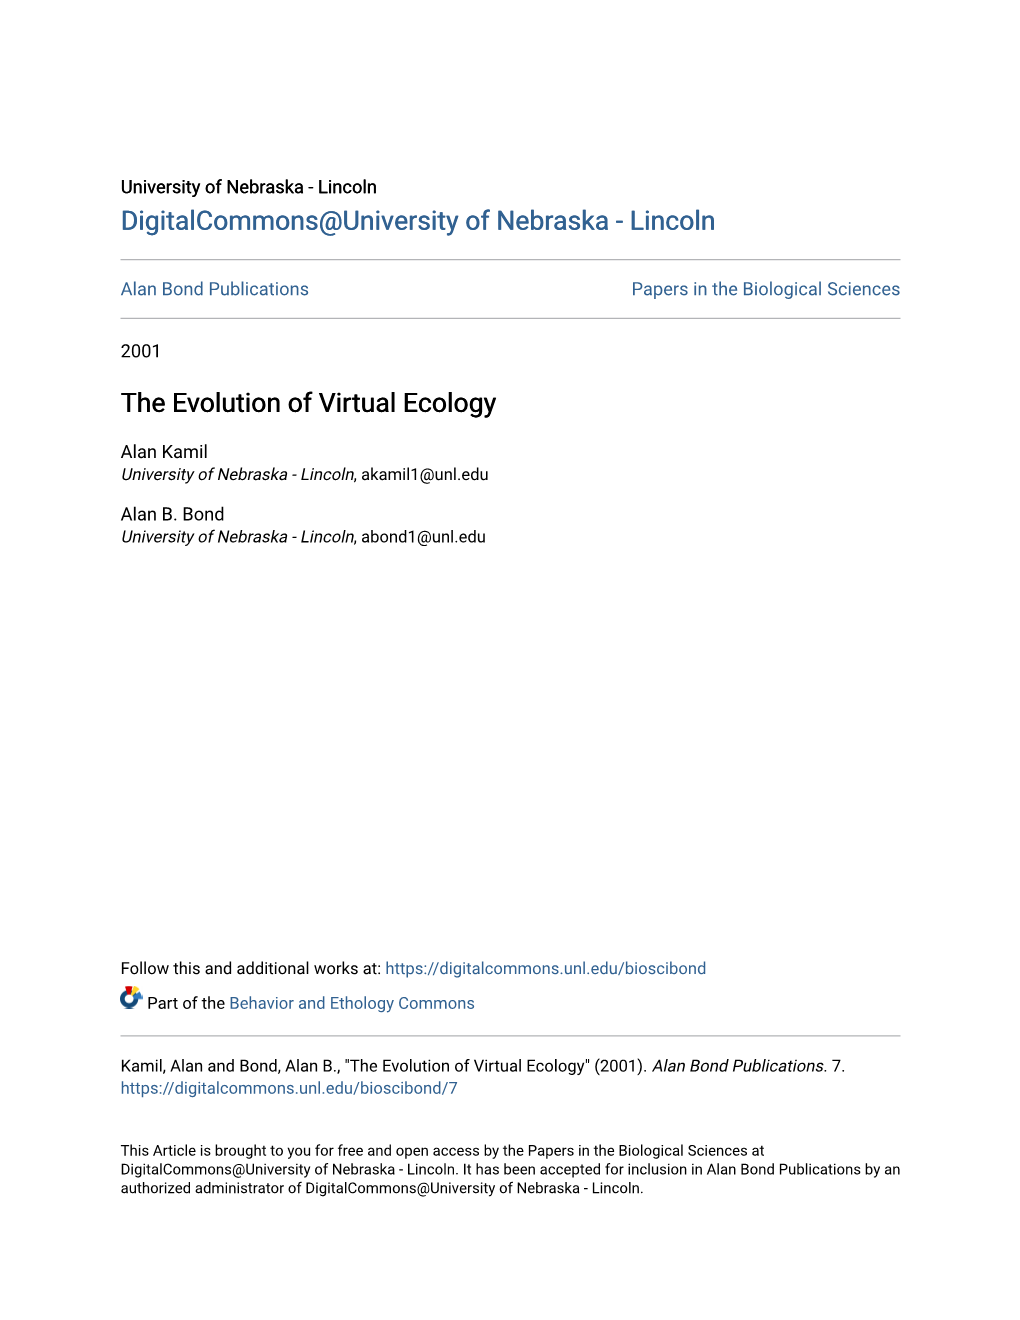 The Evolution of Virtual Ecology